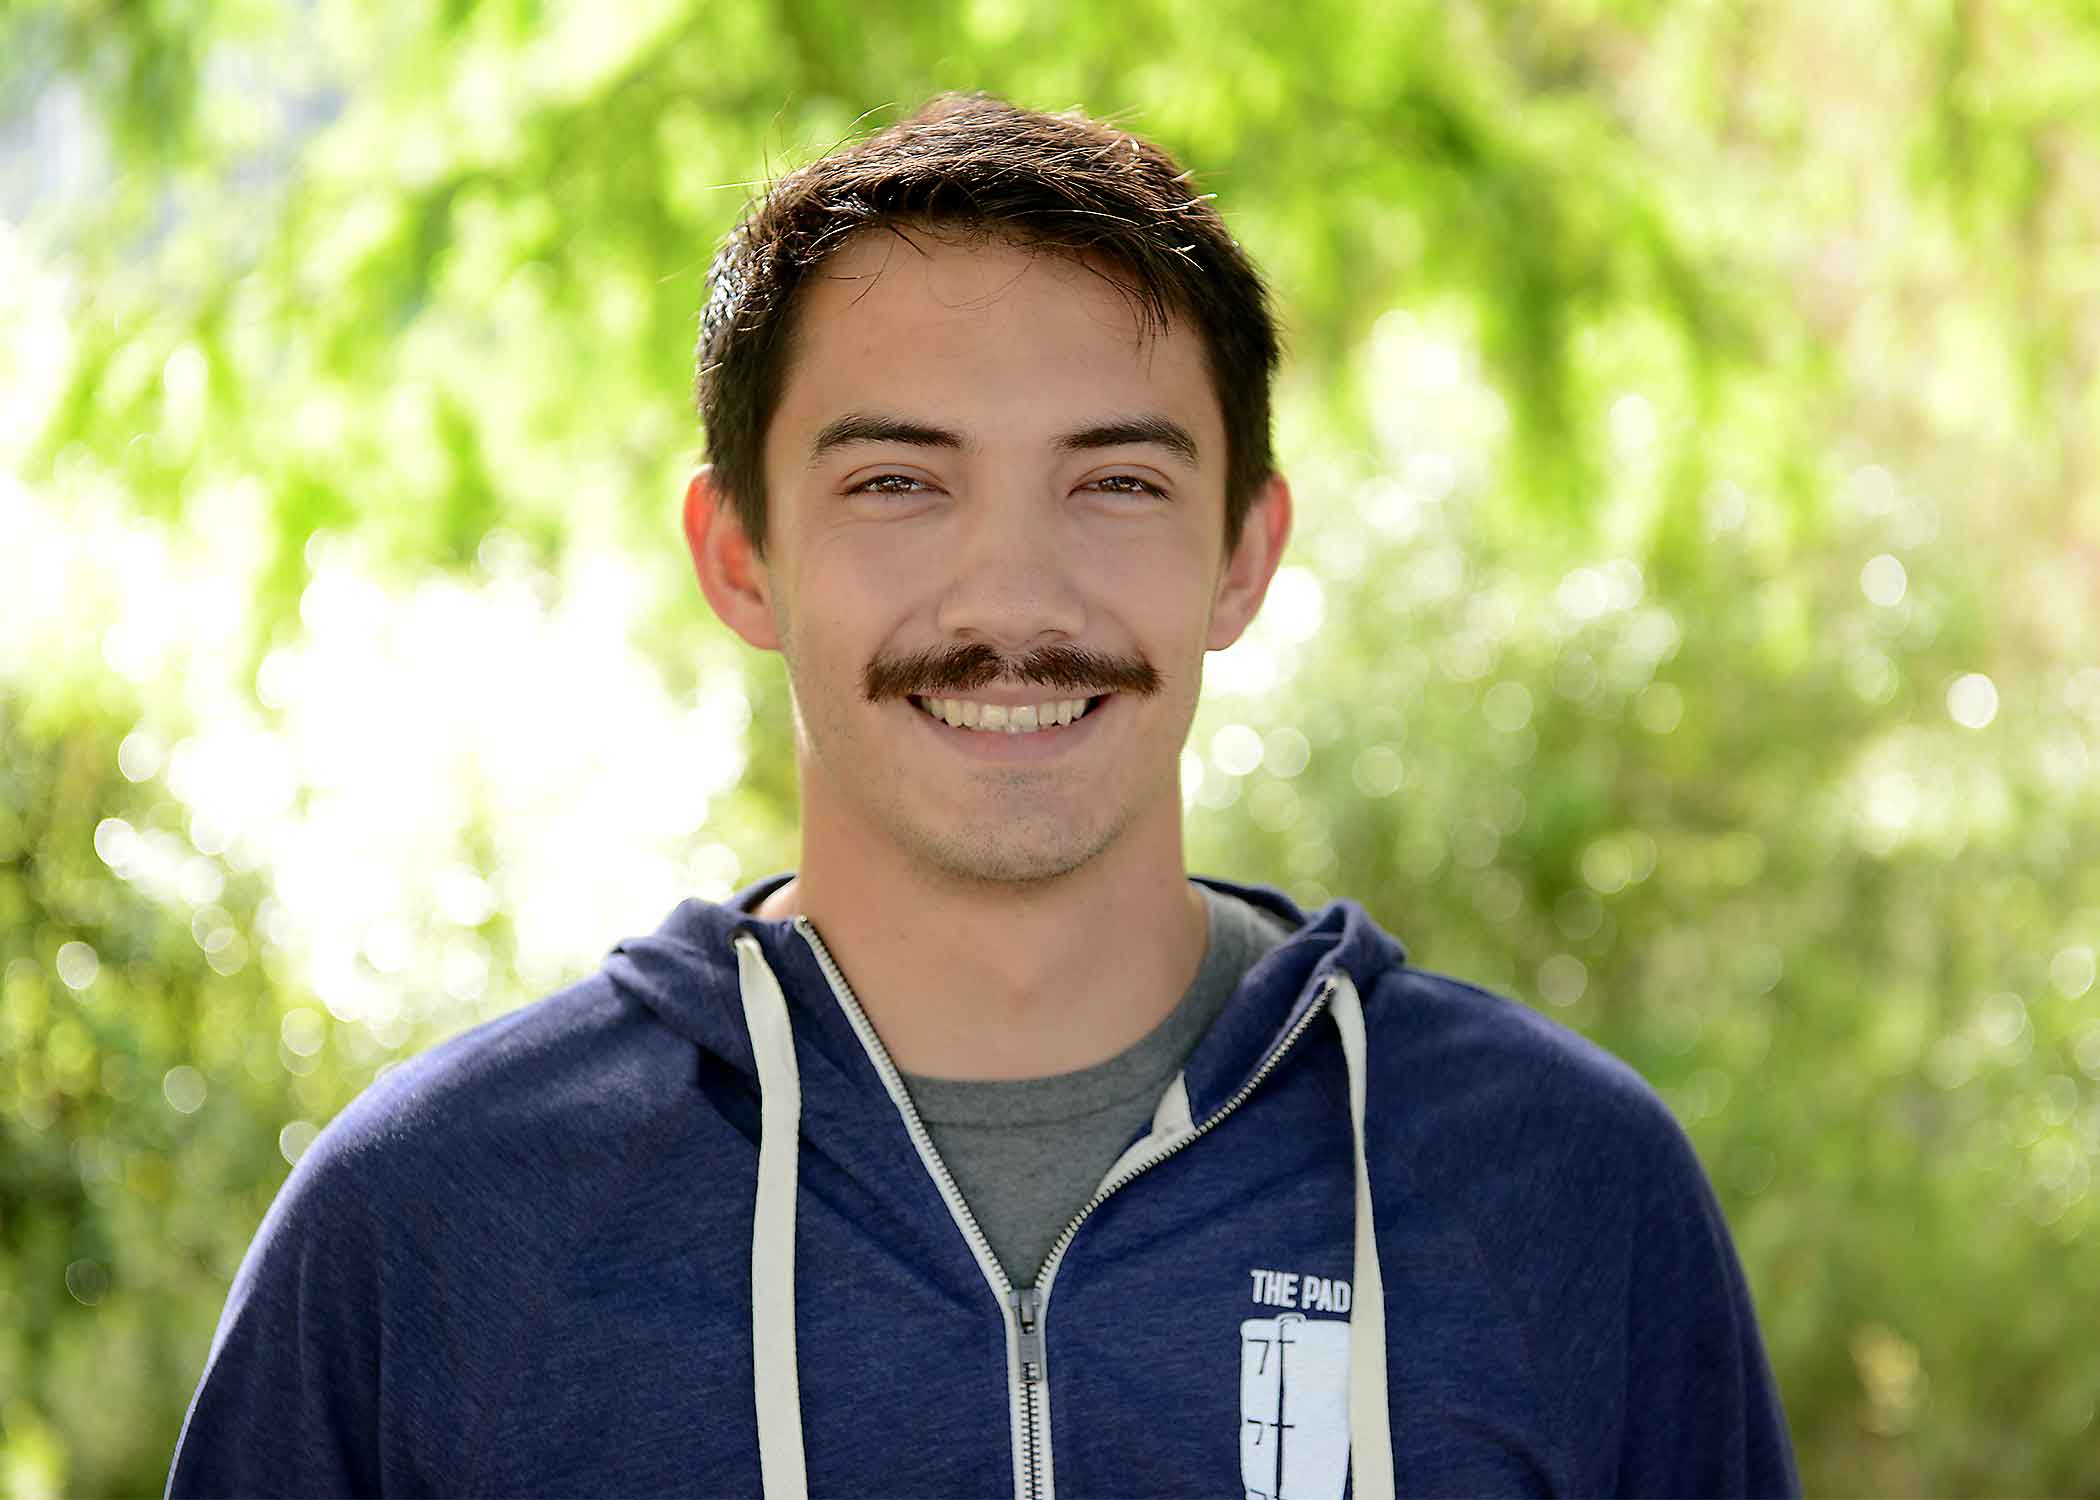 James Carlson, a 2019 Cal Poly graduate, smiles for a photo on campus.